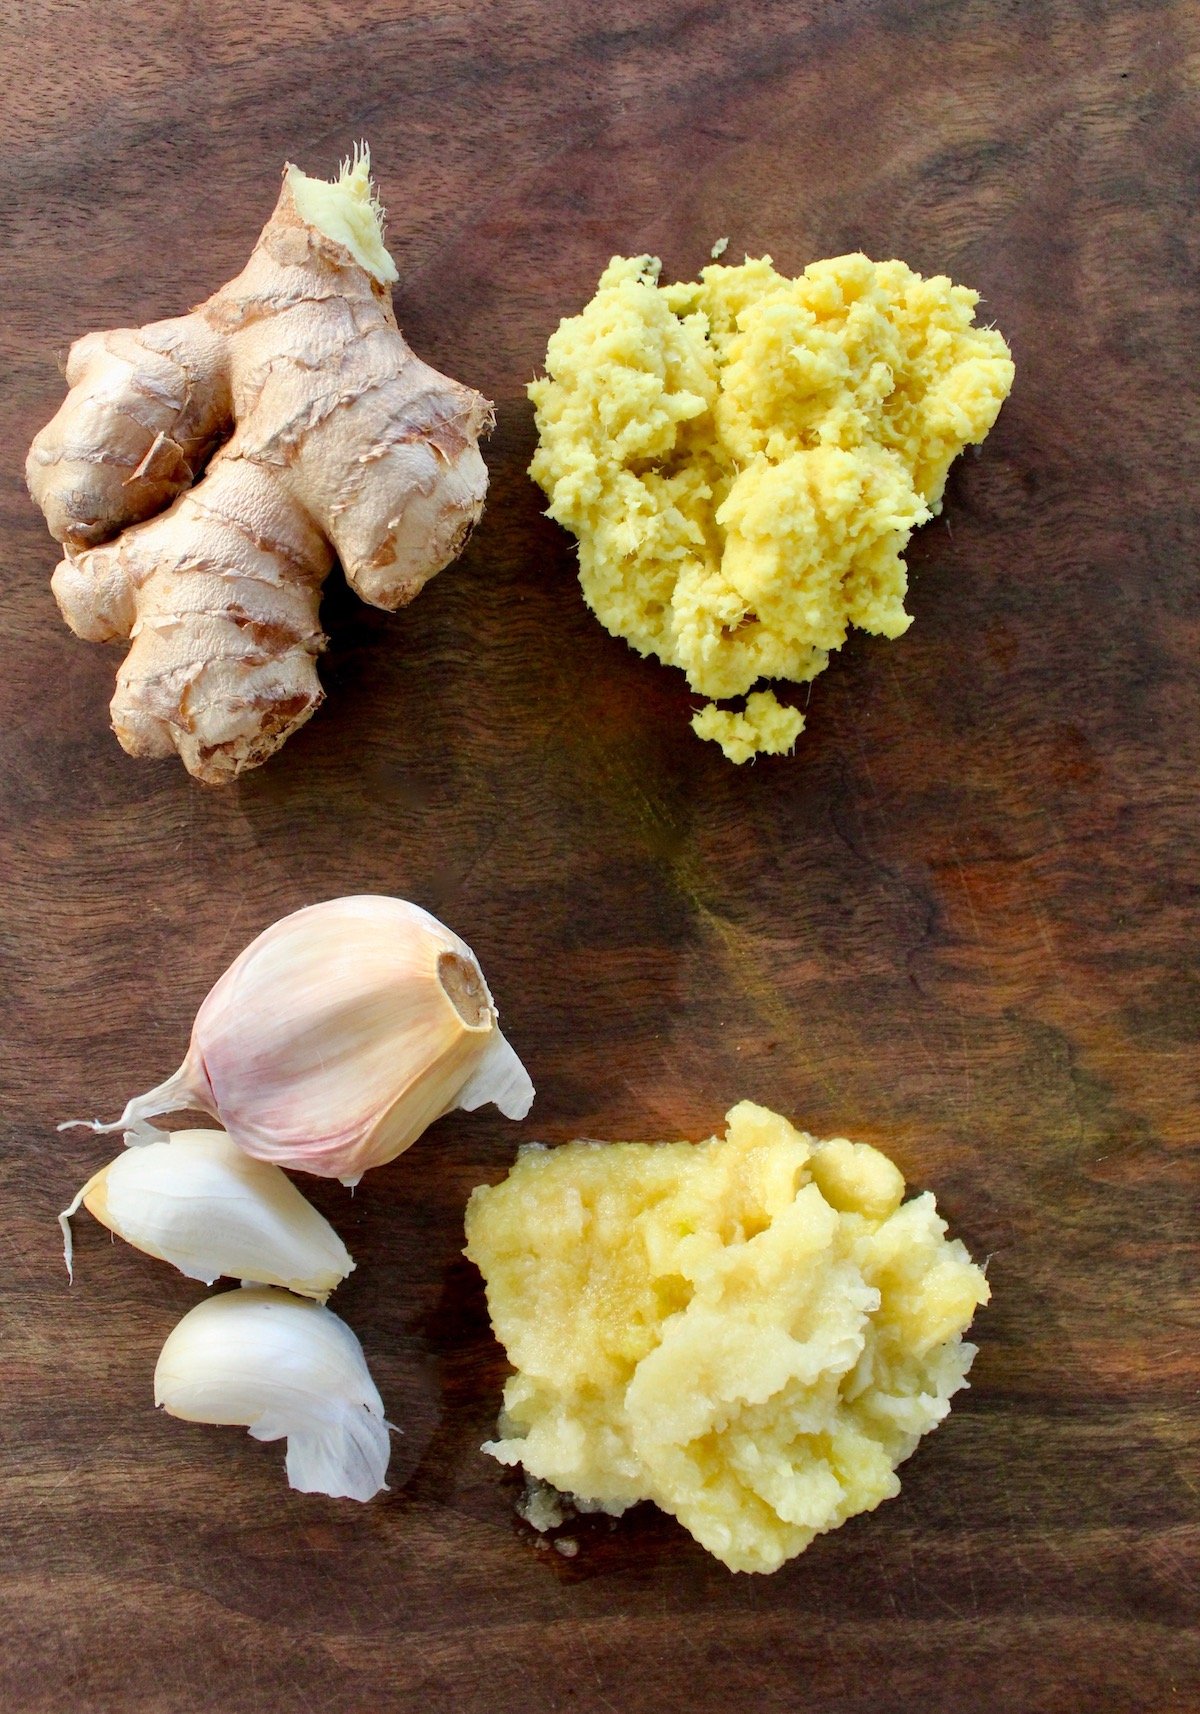 ginger and garlic pulp on cutting board with garlic cloves and ginger finger